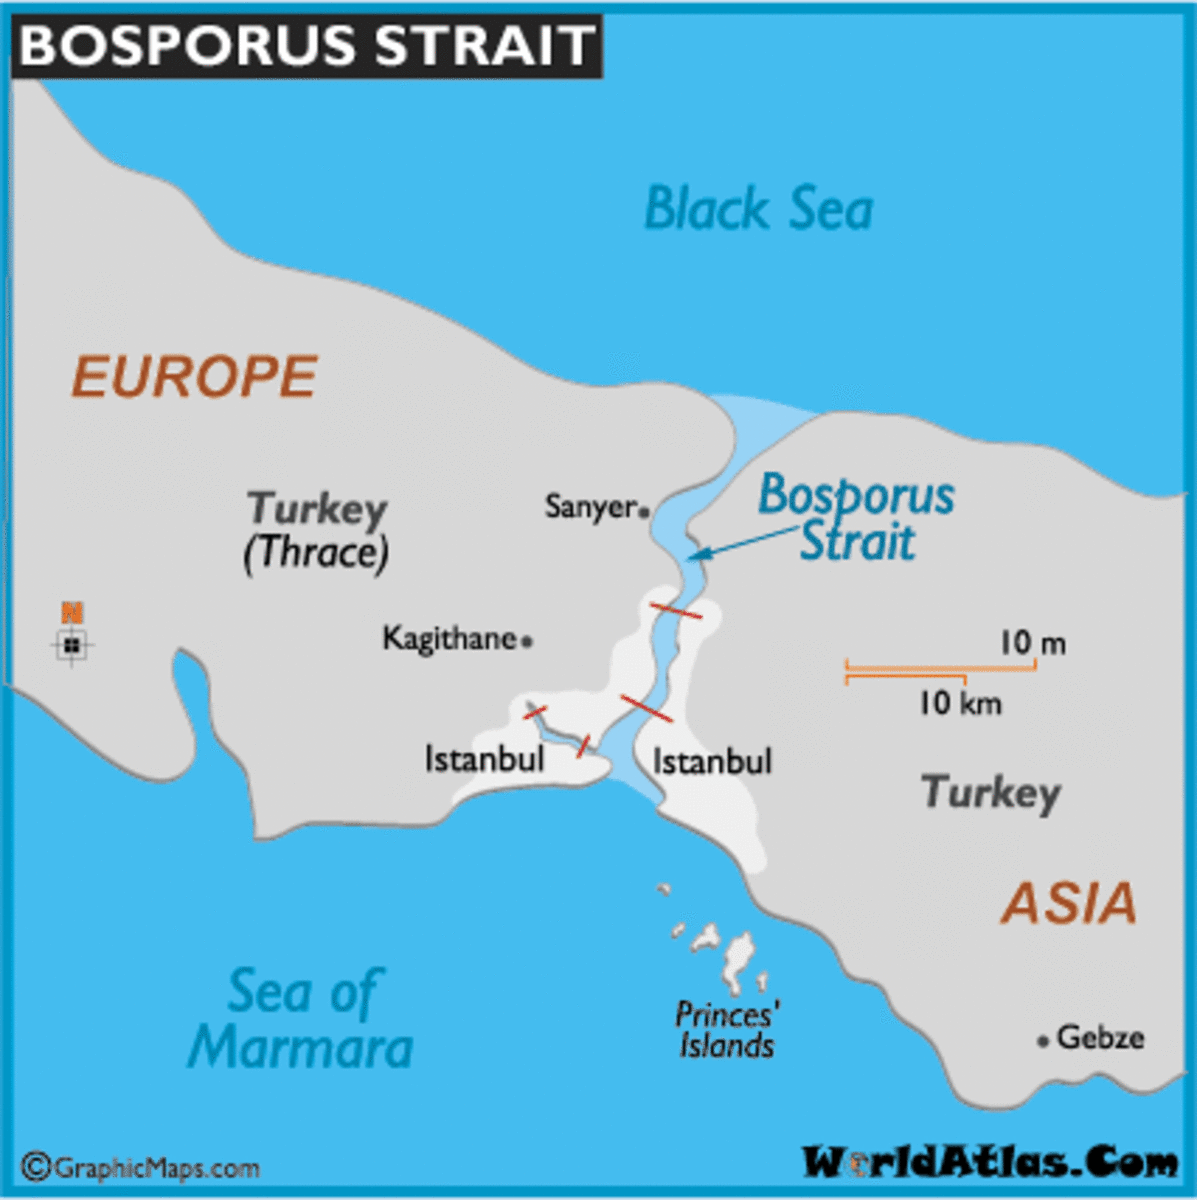 The Bosporus Strait in Turkey  is the strait that divides two continents and also the city of Istanbul in two haves. Some people believe that in very ancient times it was not there  the Black Sea was a lake and not connected to the Mediterranean Sea.